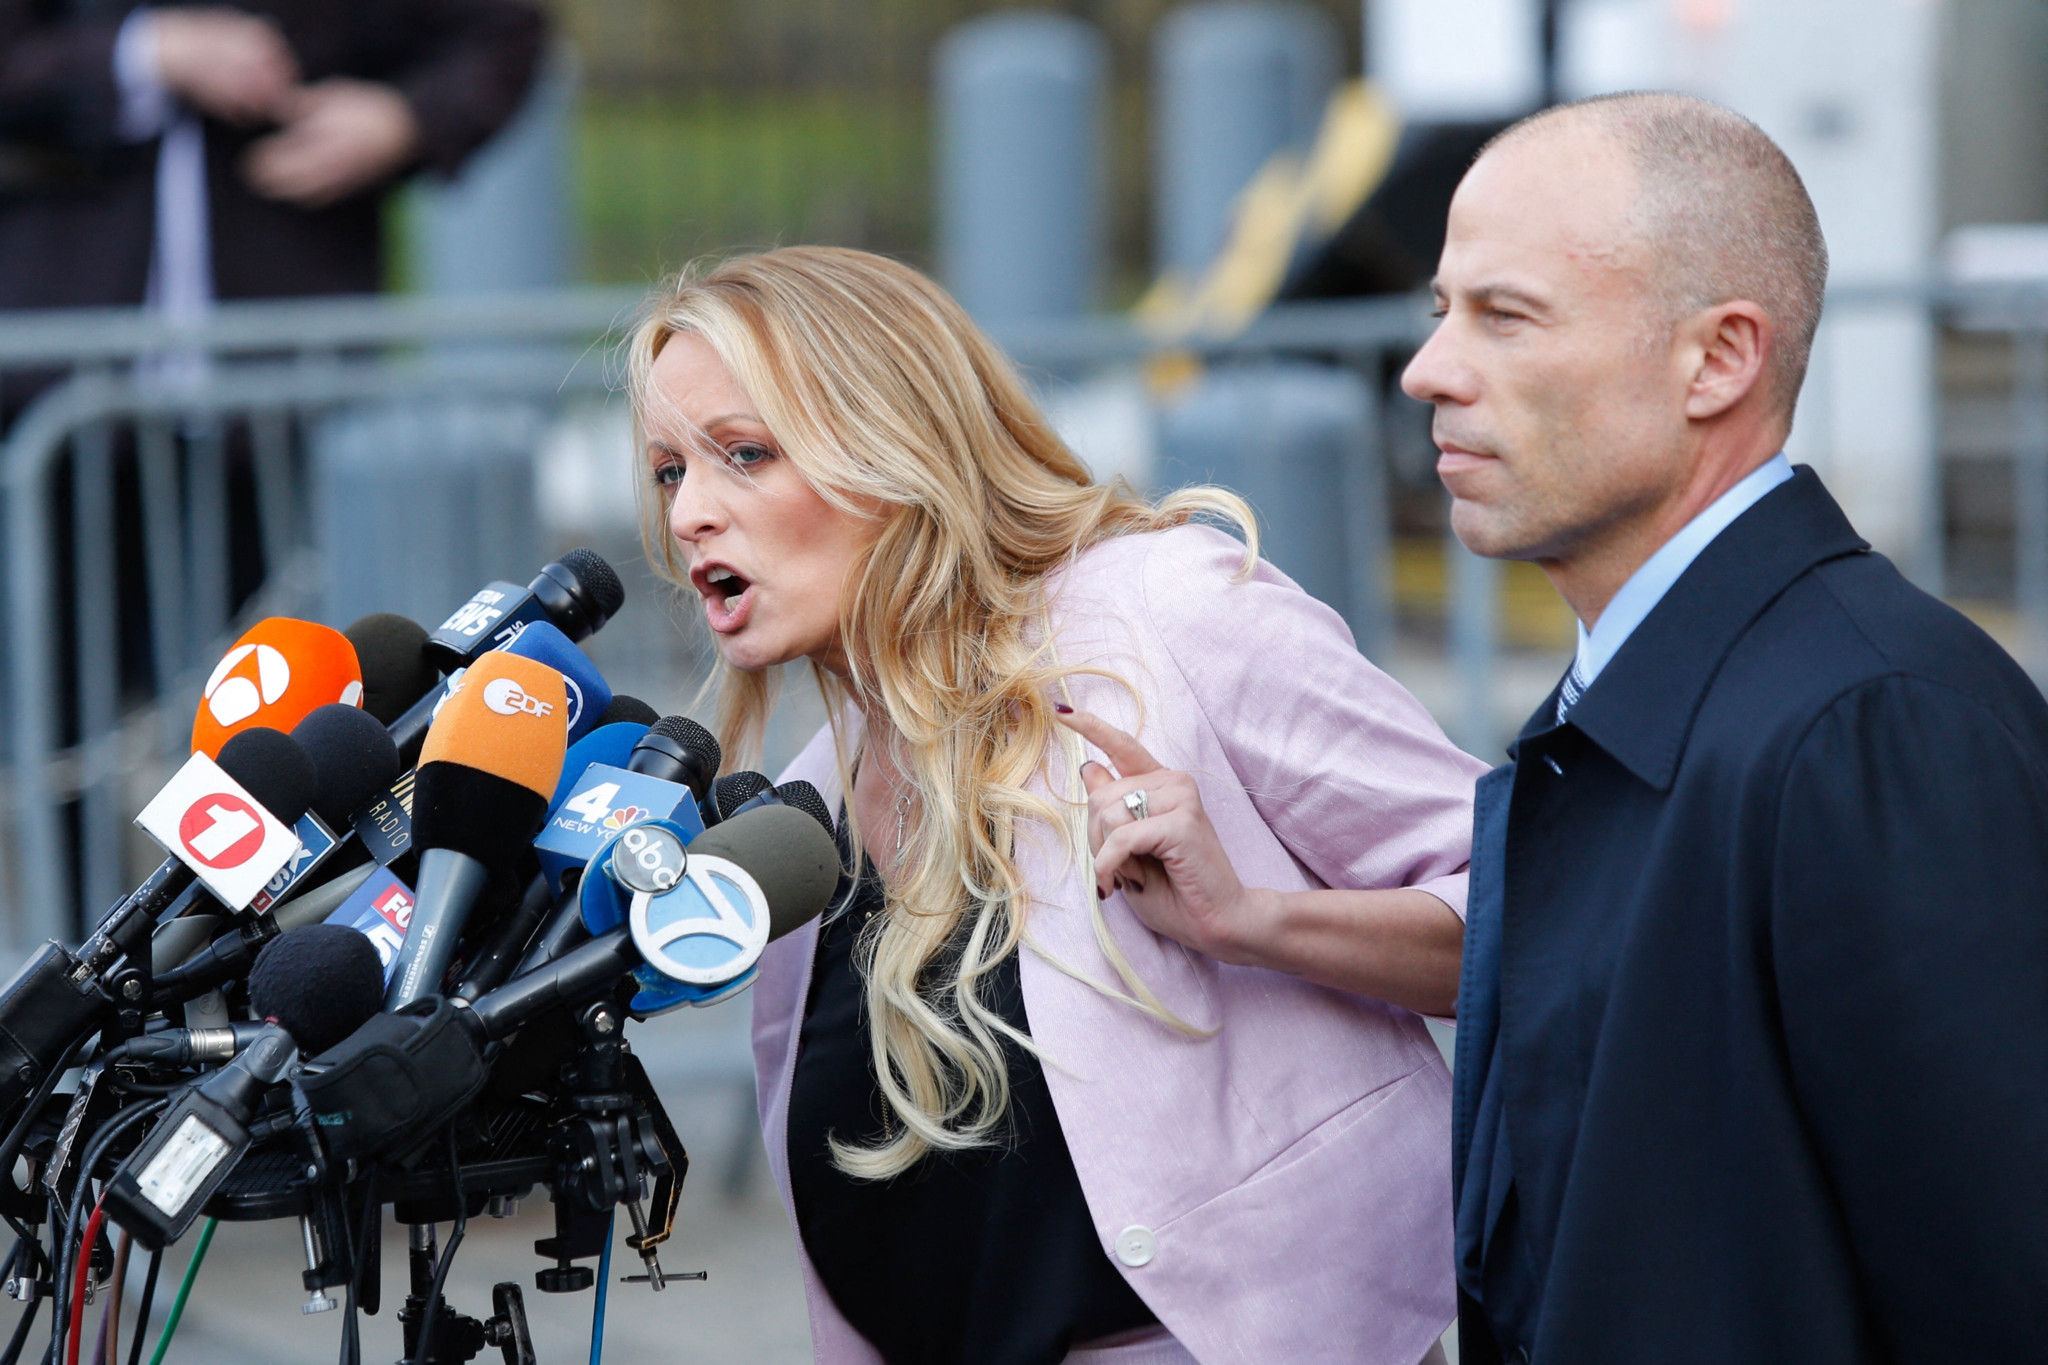 (FILES) Adult-film actress Stephanie Clifford, also known as Stormy Daniels speaks US Federal Court with her lawyer Michael Avenatti (R) on April 16, 2018, in Lower Manhattan, New York. Donald Trump goes on trial on April 15, 2024 for allegedly covering up hush money payments to hide affairs ahead of the 2016 presidential election which propelled him into the White House. (Photo by EDUARDO MUNOZ ALVAREZ / AFP)